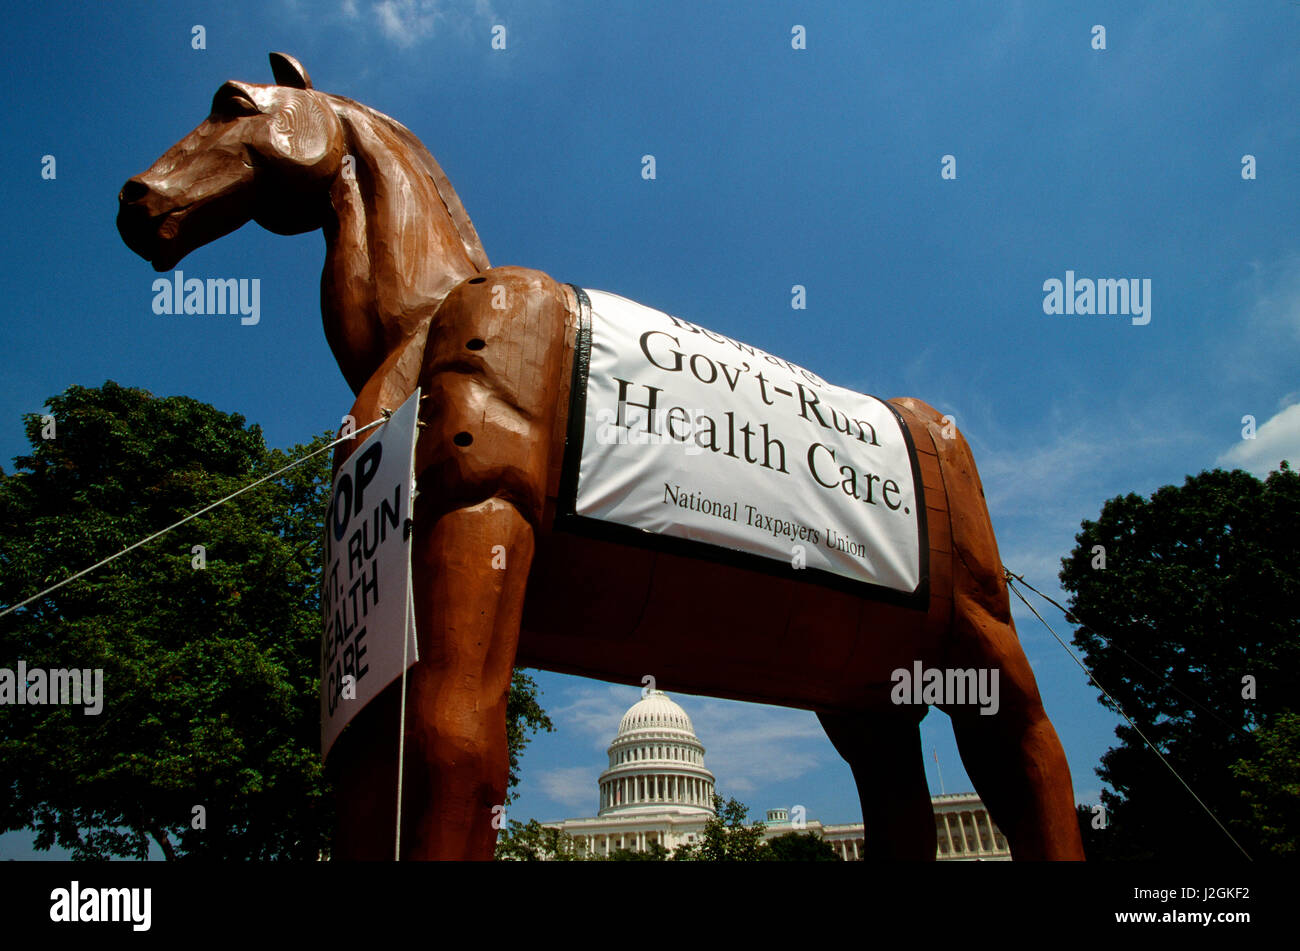 A Trojan Horse symbolizing hidden health care cost and sponsored by the National Tax Payers Union in August 1997, Washington DC Stock Photo